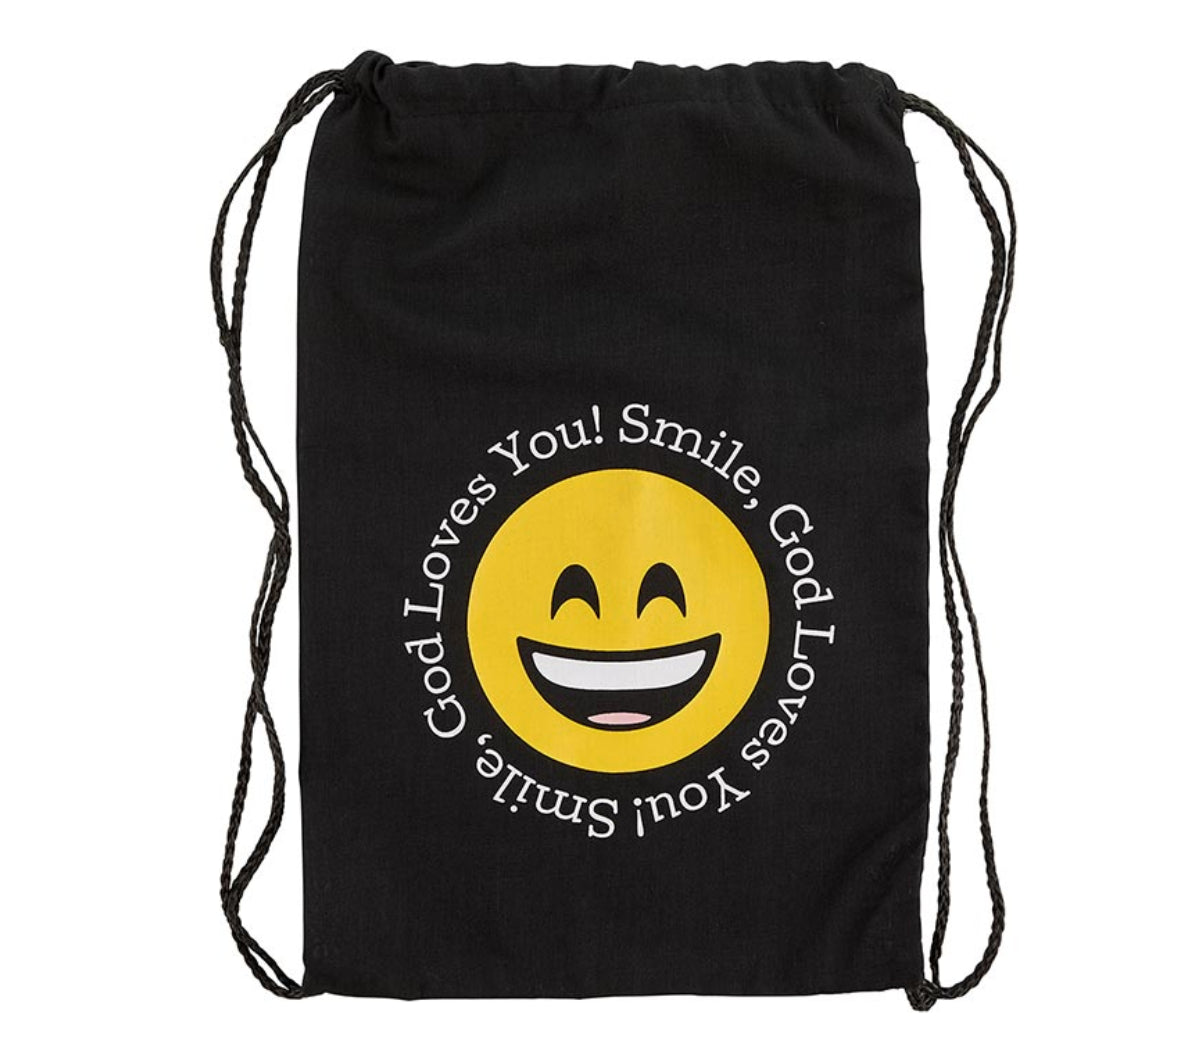 Smile! God Loves You Drawstring Backpack - The Christian Gift Company